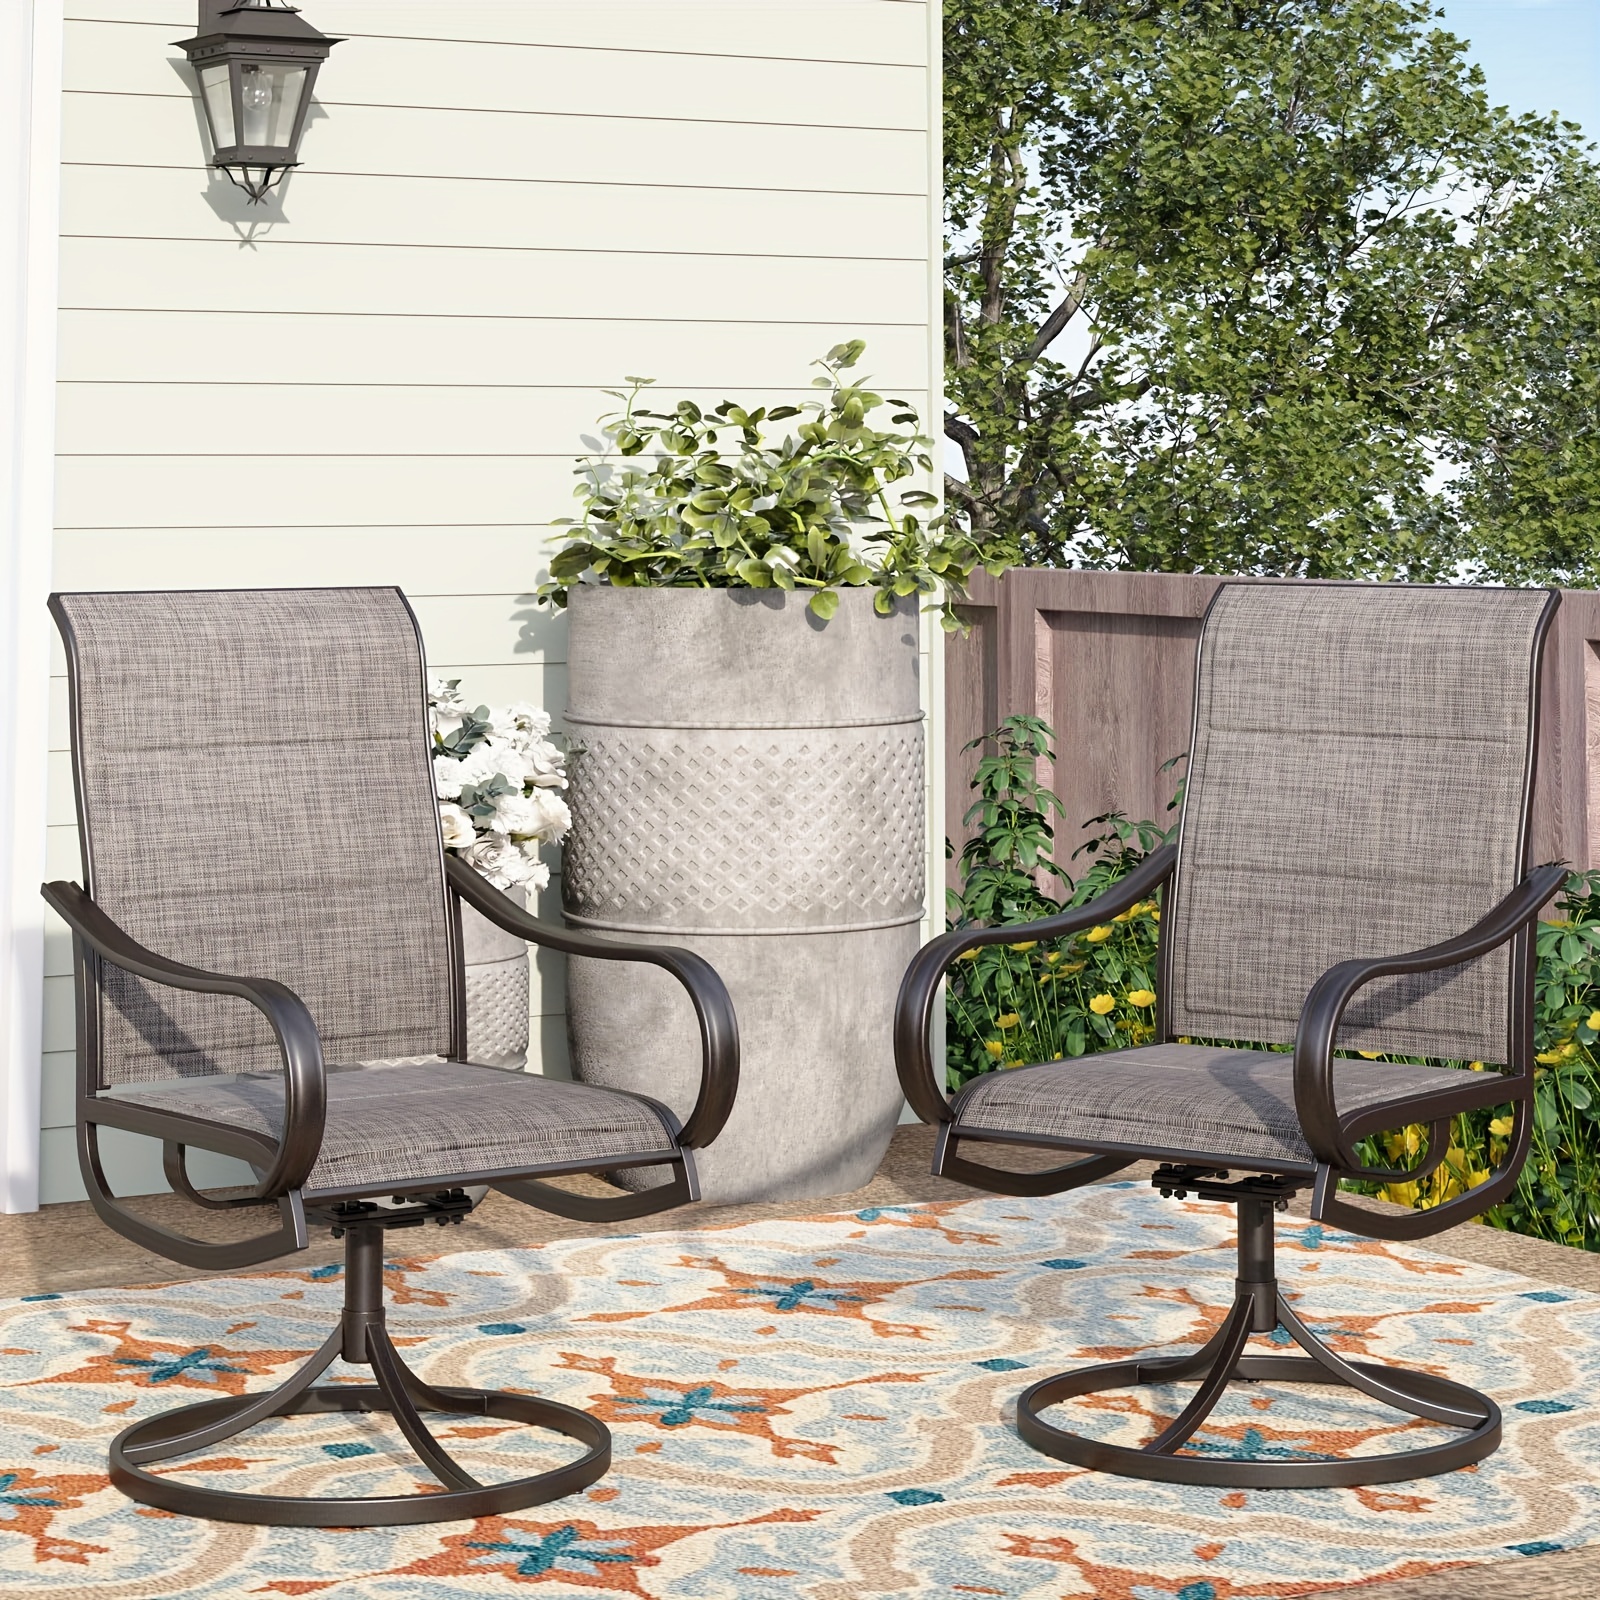 

Swivel Patio Dining Chair With 42" High Back, Padded Textilene Deep Seating Outdoor Chairs With Armrest & E-coating Frame, All Weather-resistant For Deck Lawn Garden, Set Of 2